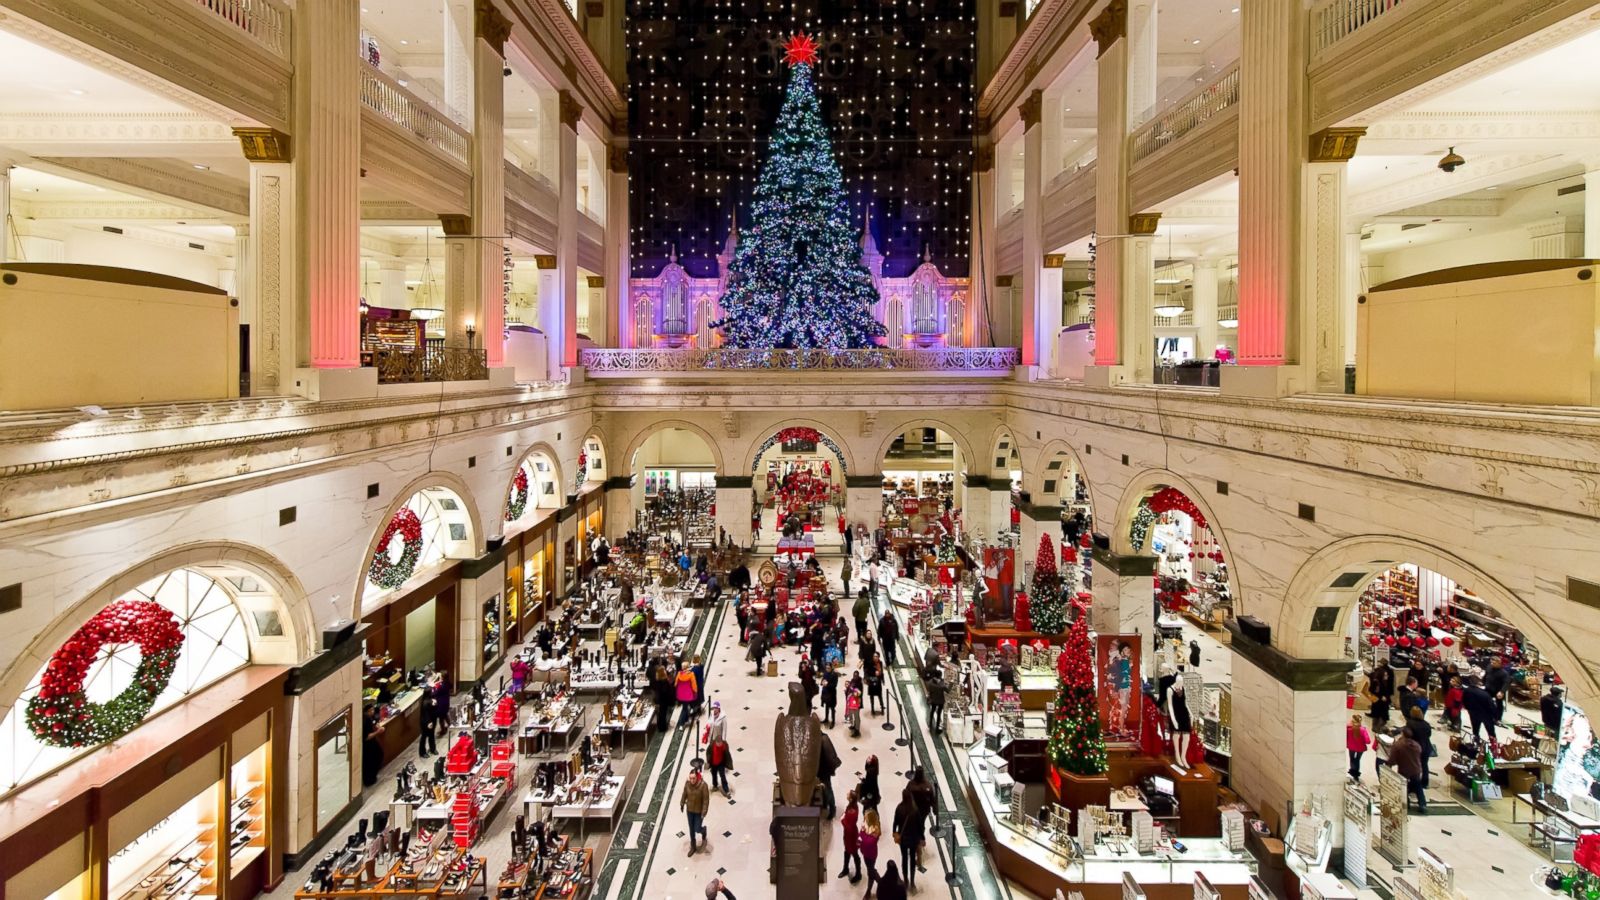 Bah Humbug! Ad Spending Falls 13% for Retailers This Holiday